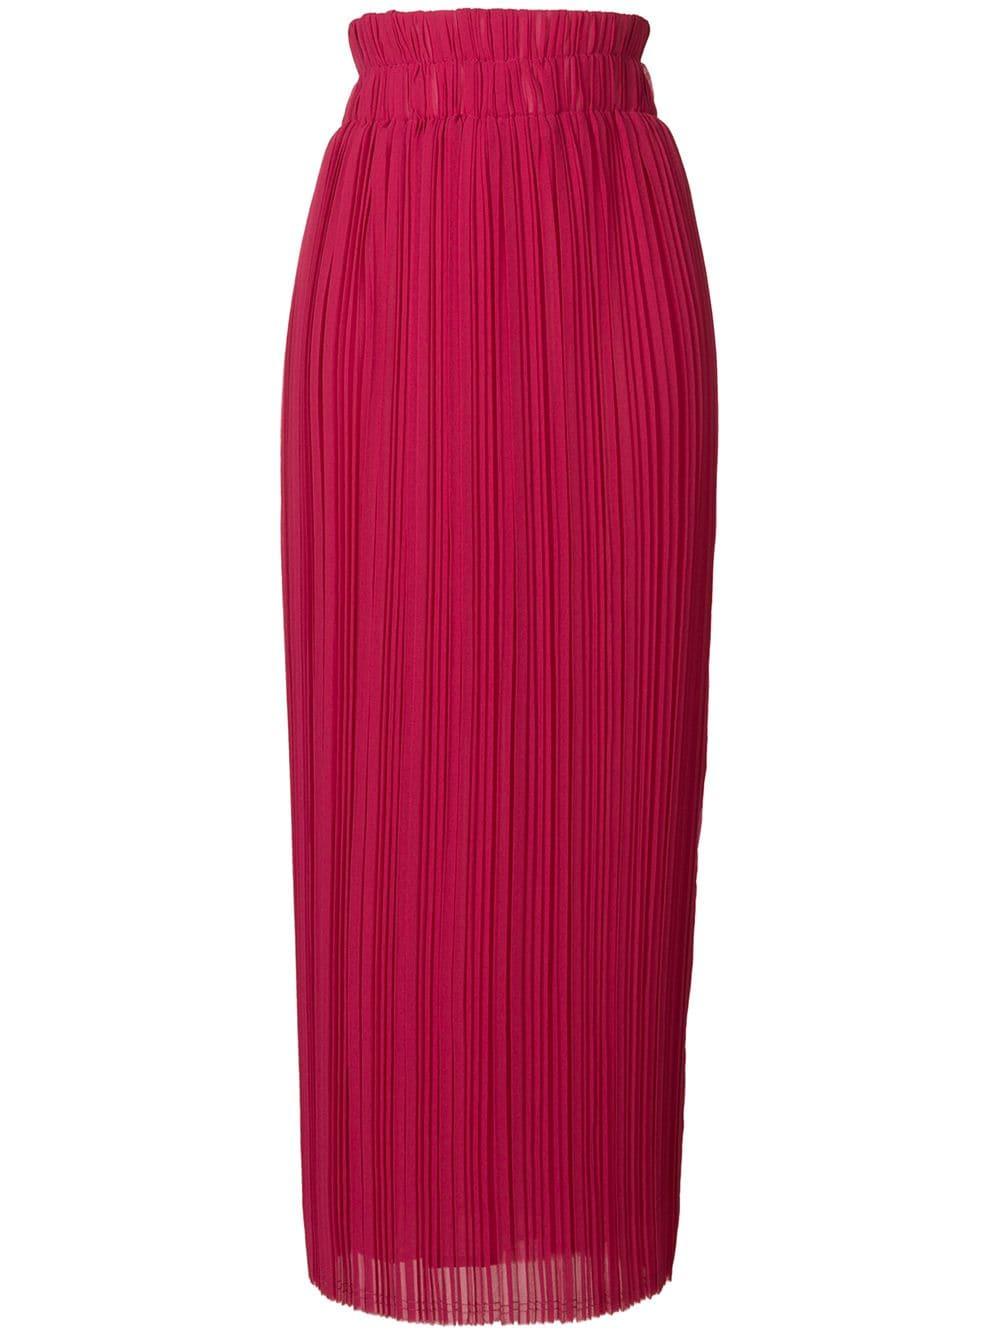 P.A.R.O.S.H. Pleated Maxi Skirt in Pink - Lyst